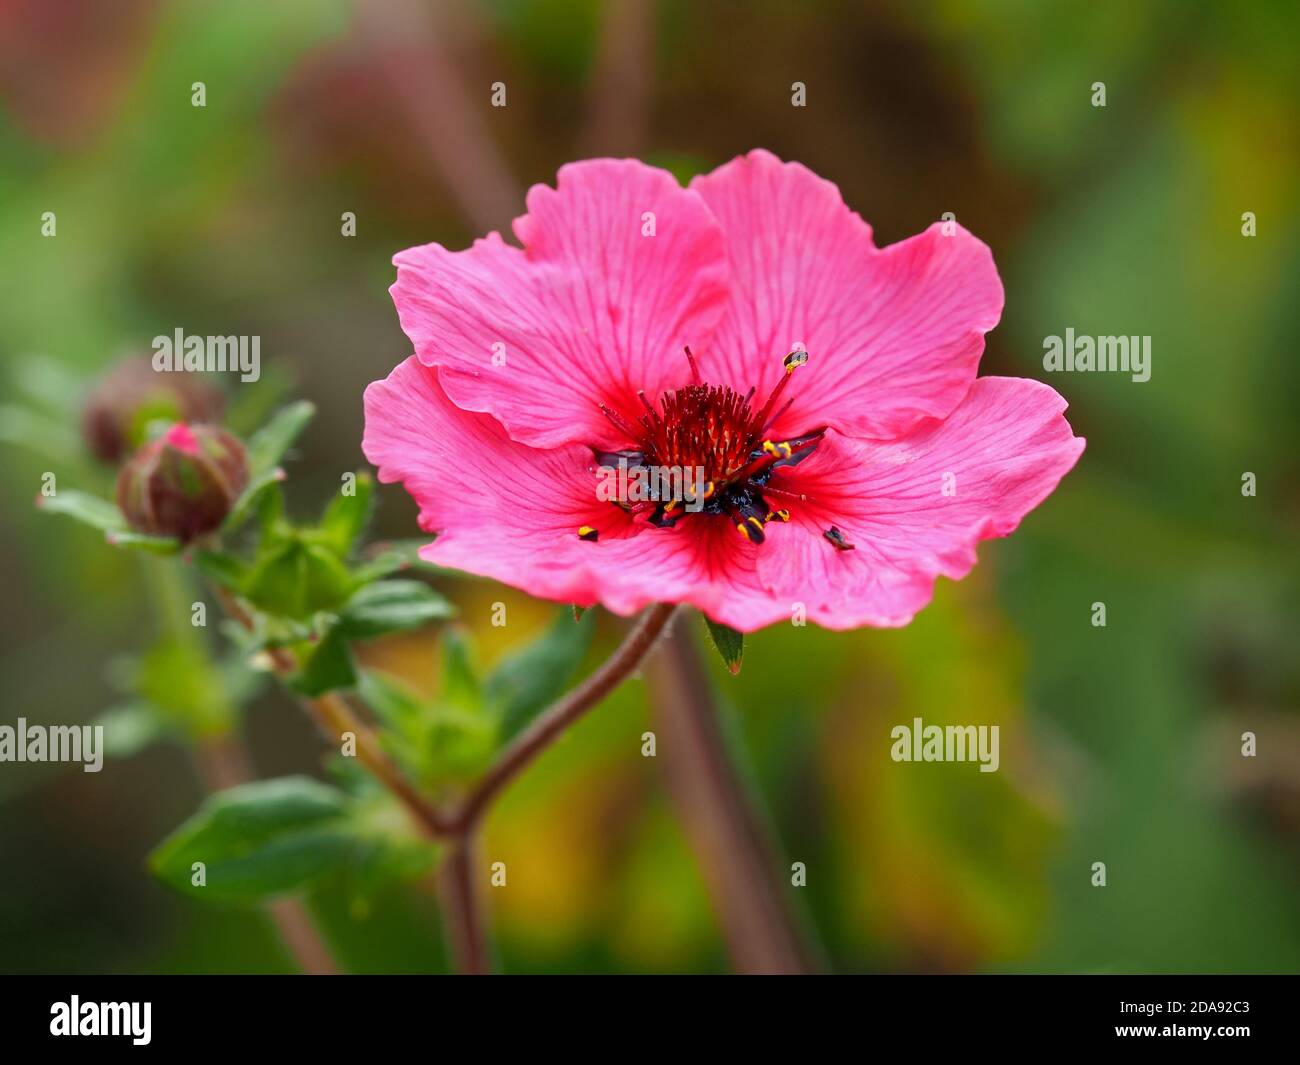 Closeup of a lovely pink cinquefoil flower and bud, Potentilla nepalensis Miss Willmott, in a garden Stock Photo